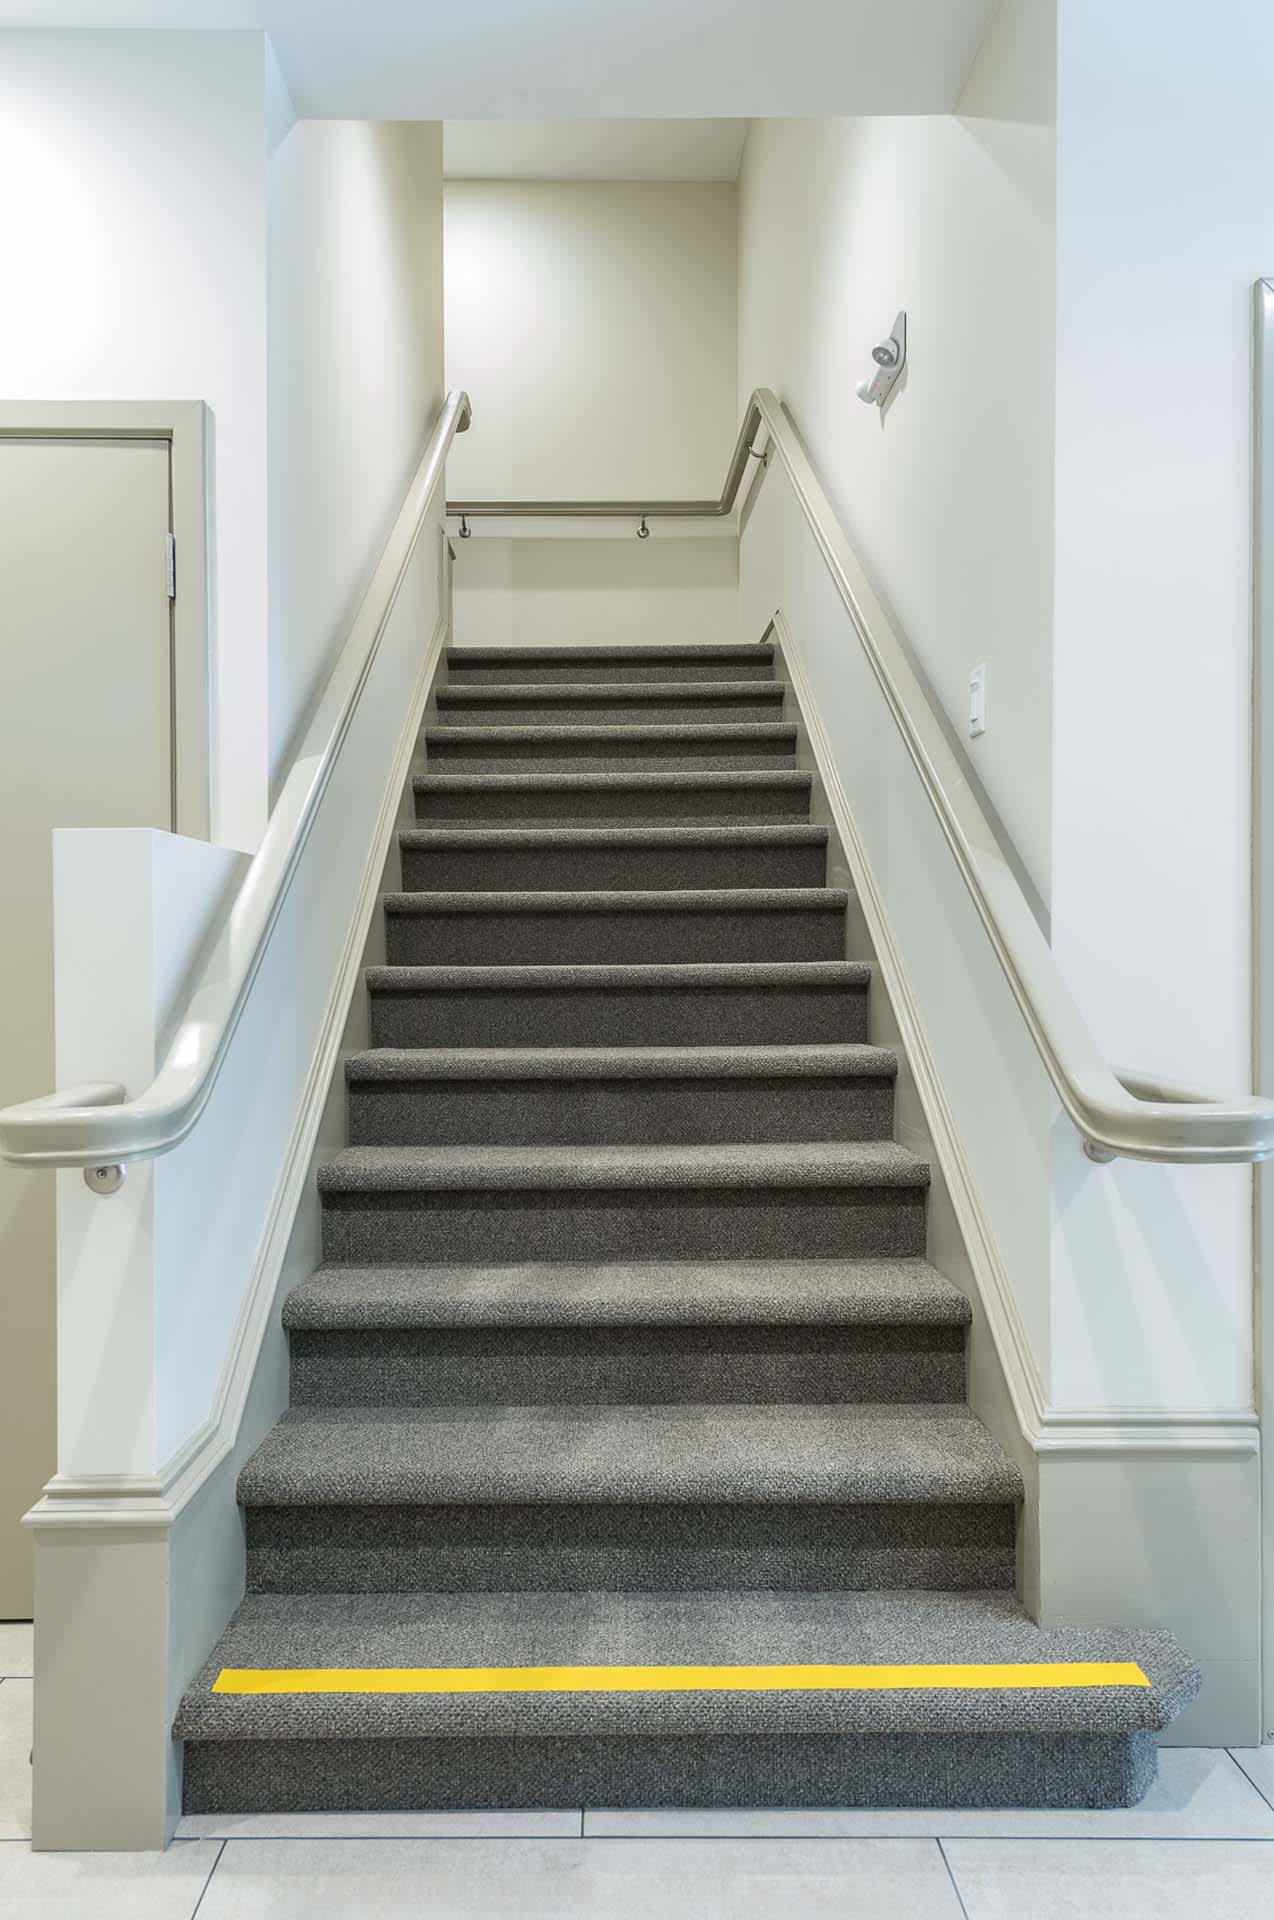 A carpet staircase with metal railing